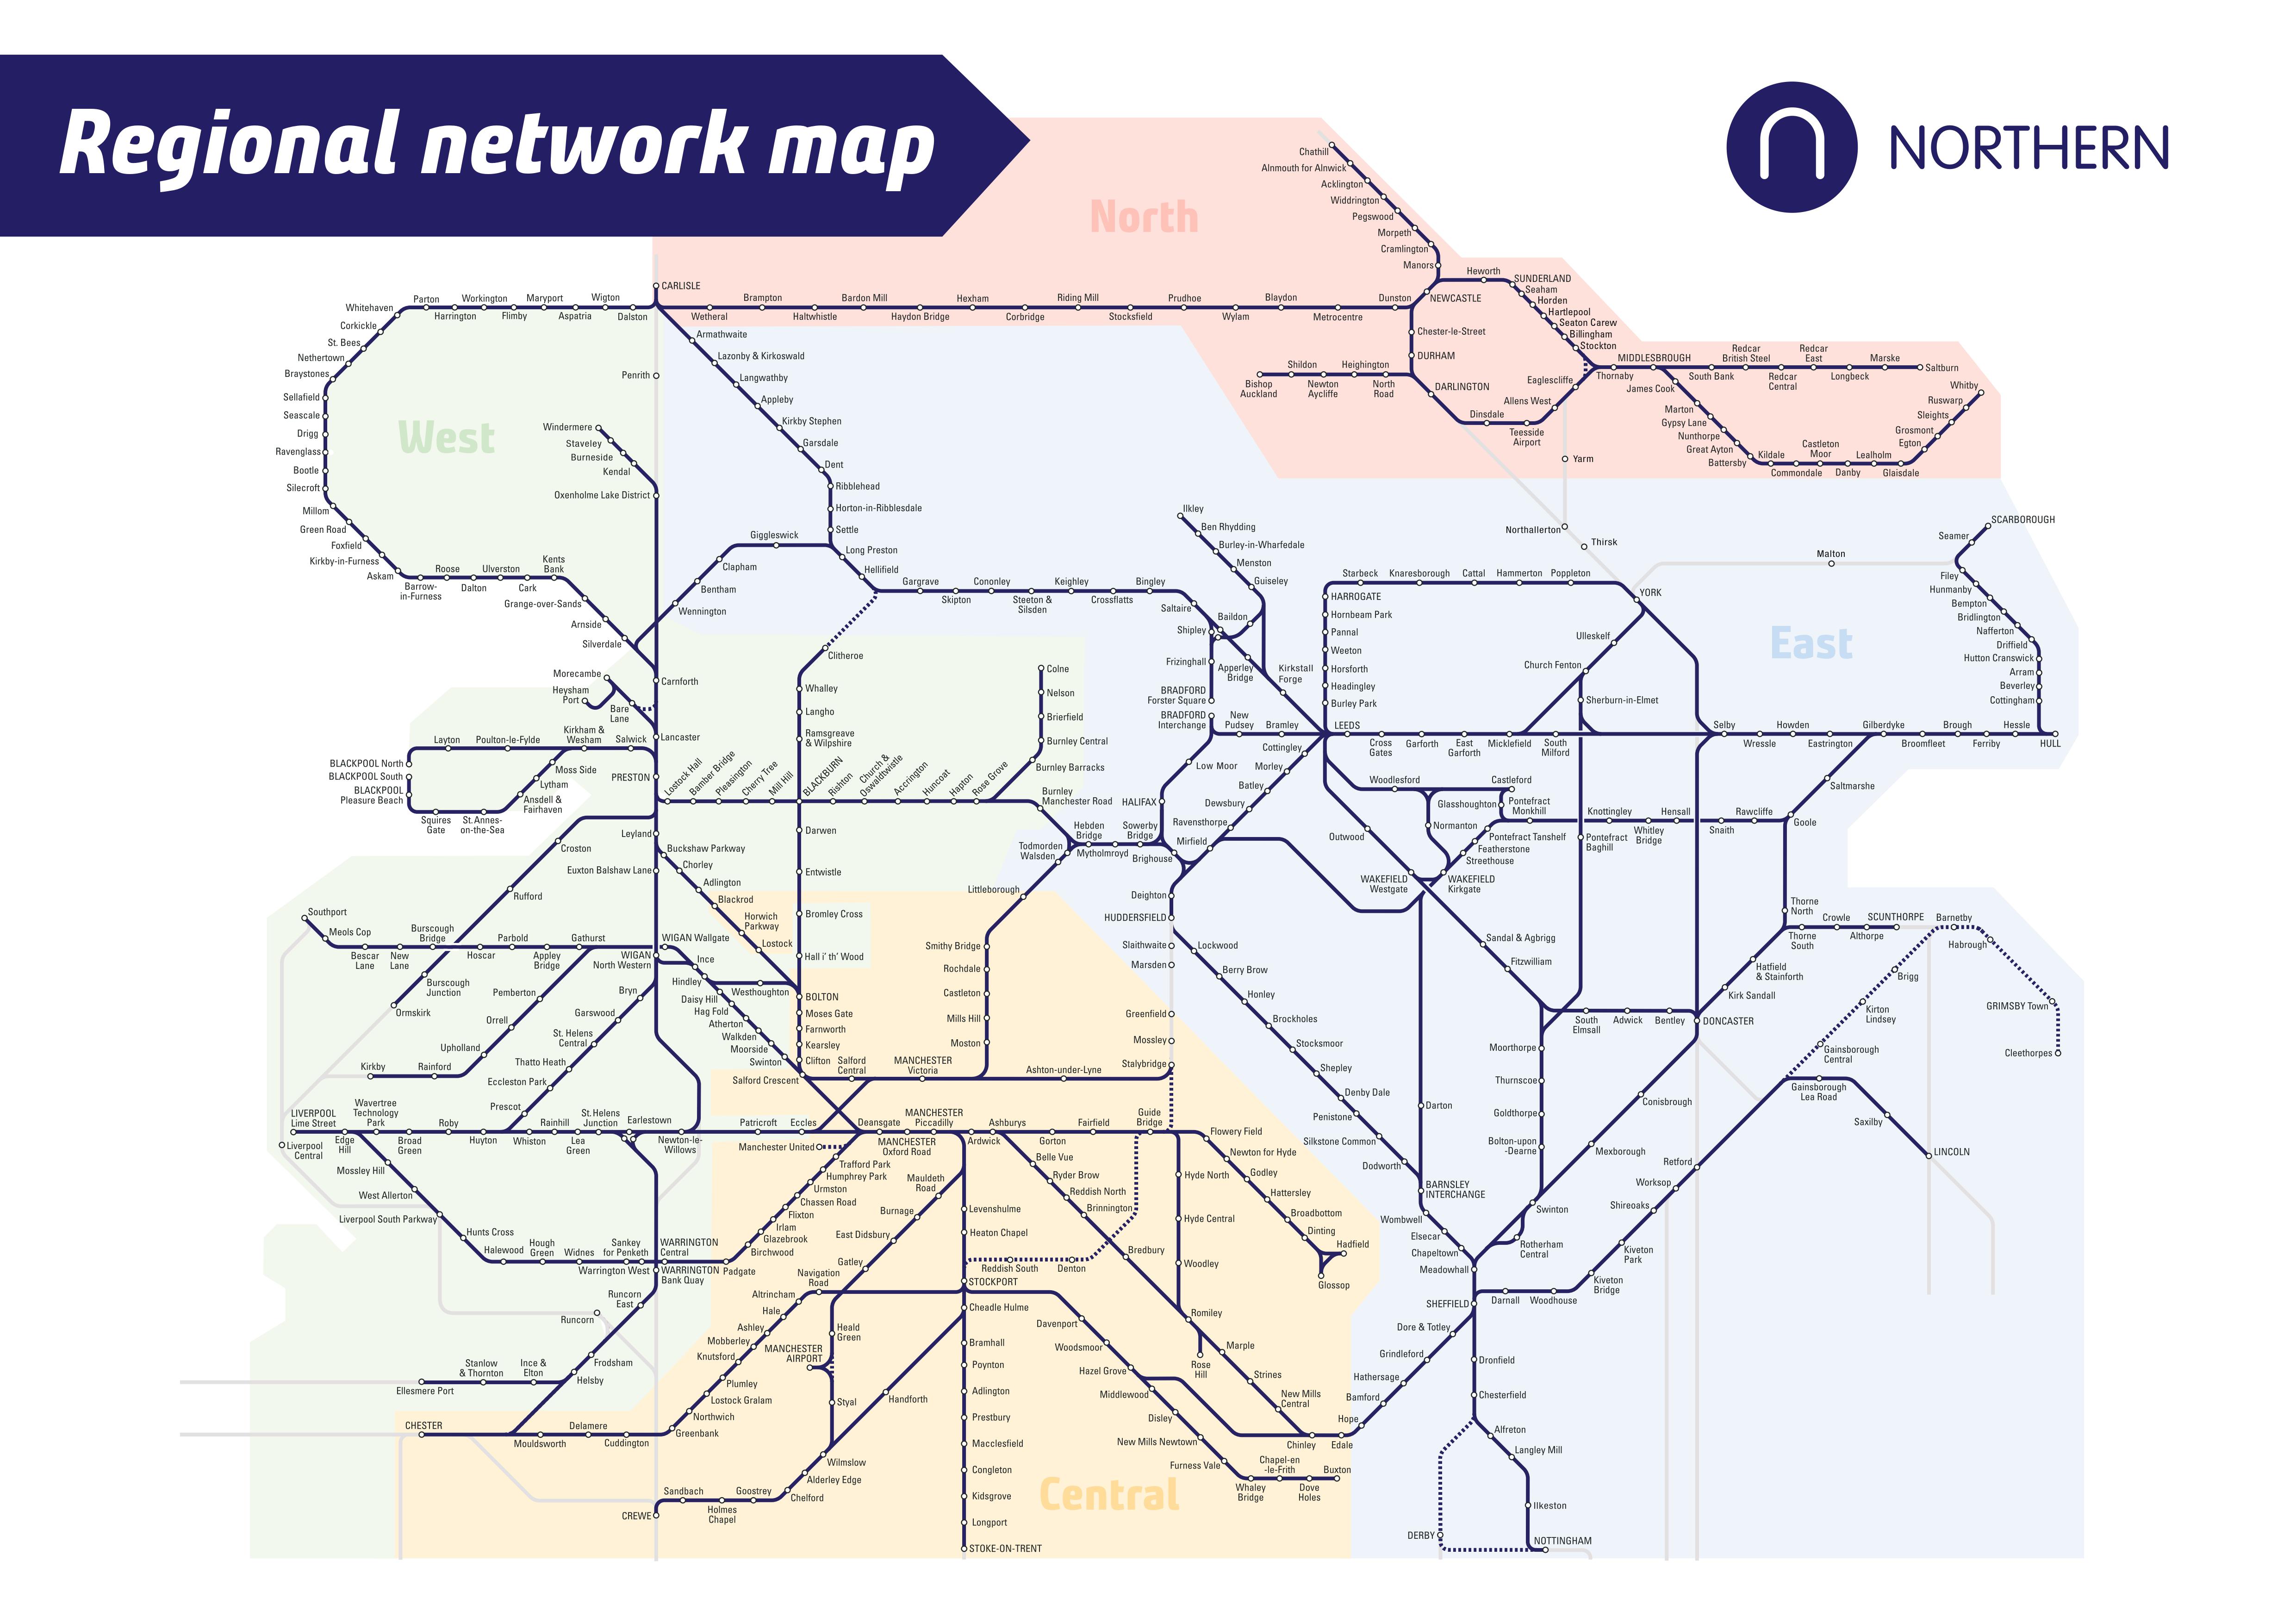 Network map with regions